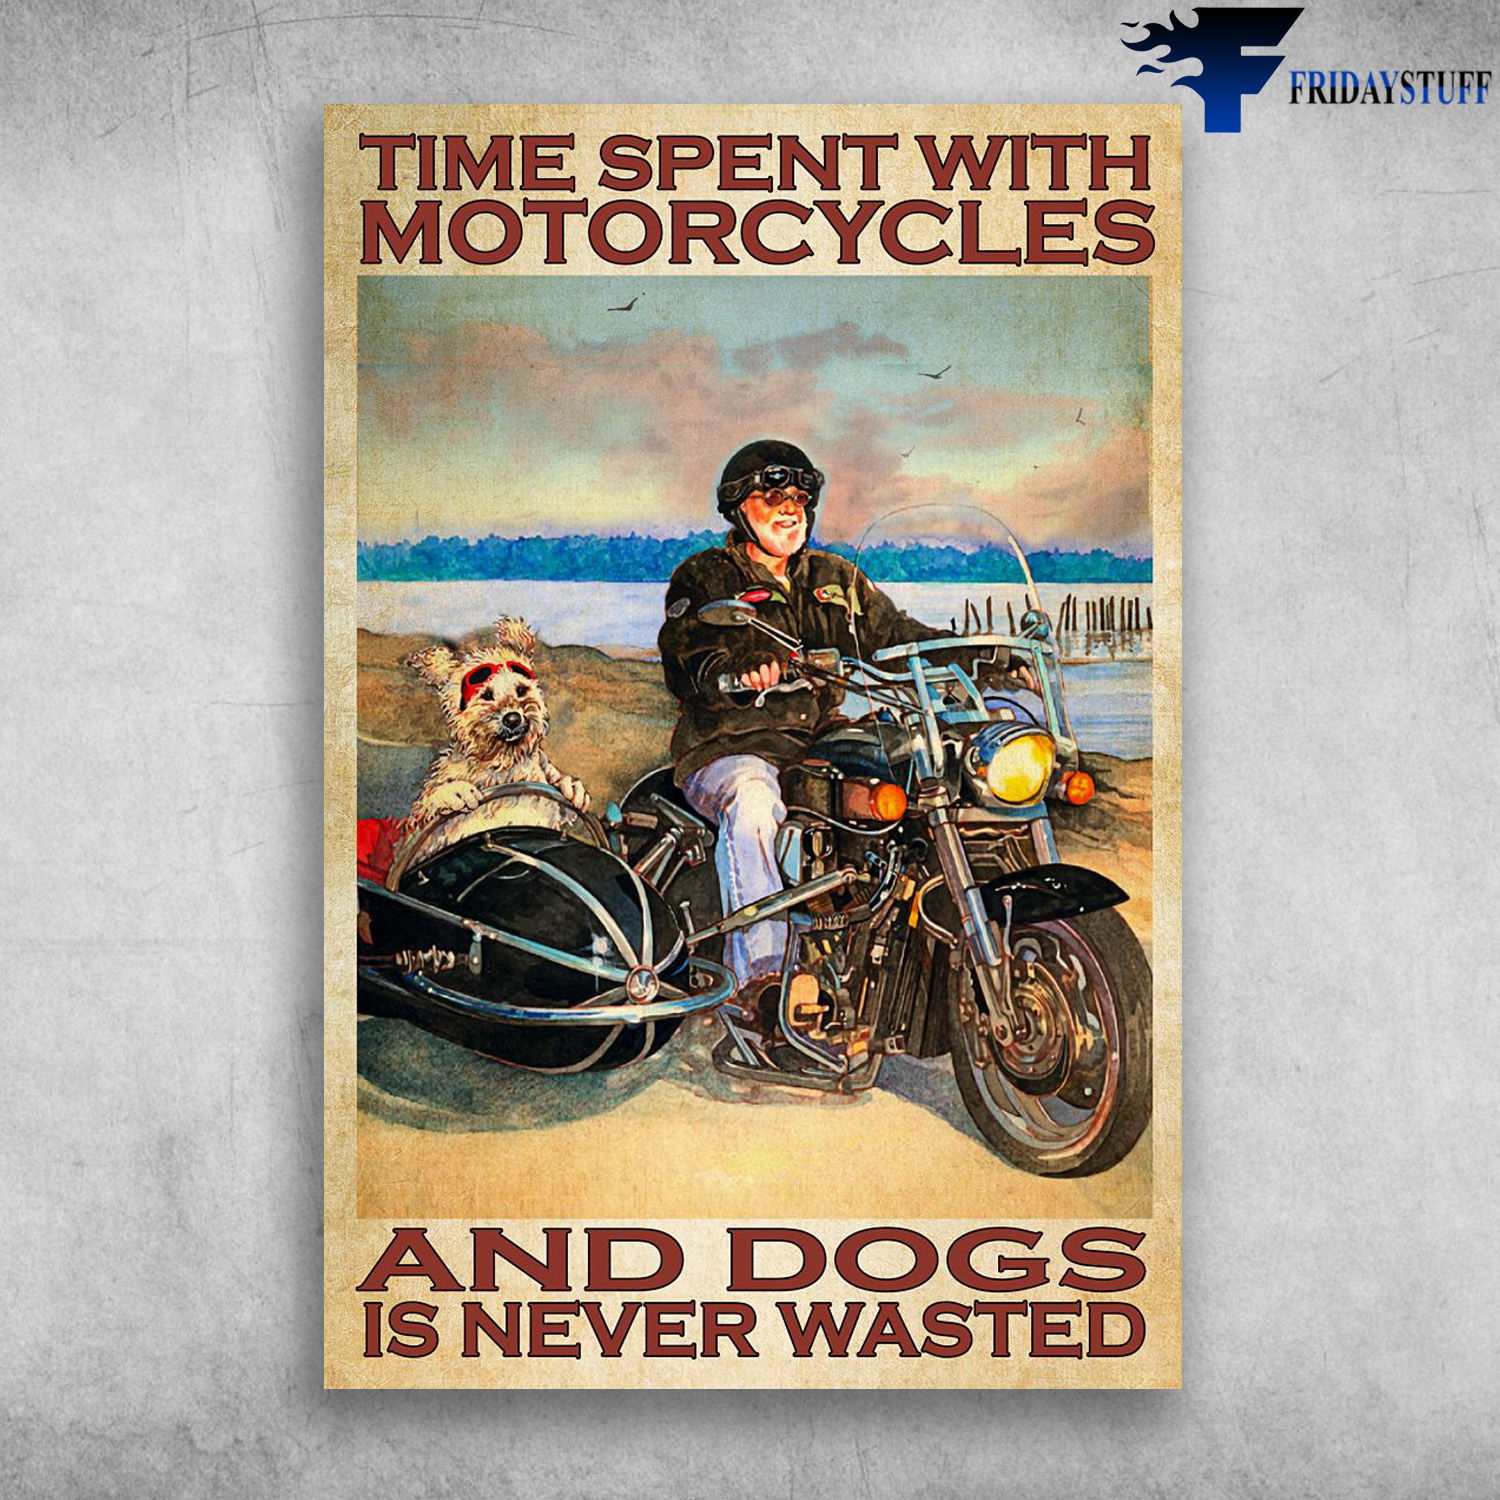 Old Man Riding Motorcycles With The Dog - Time Spent With Motorcycles And Dogs Is Never Wasted